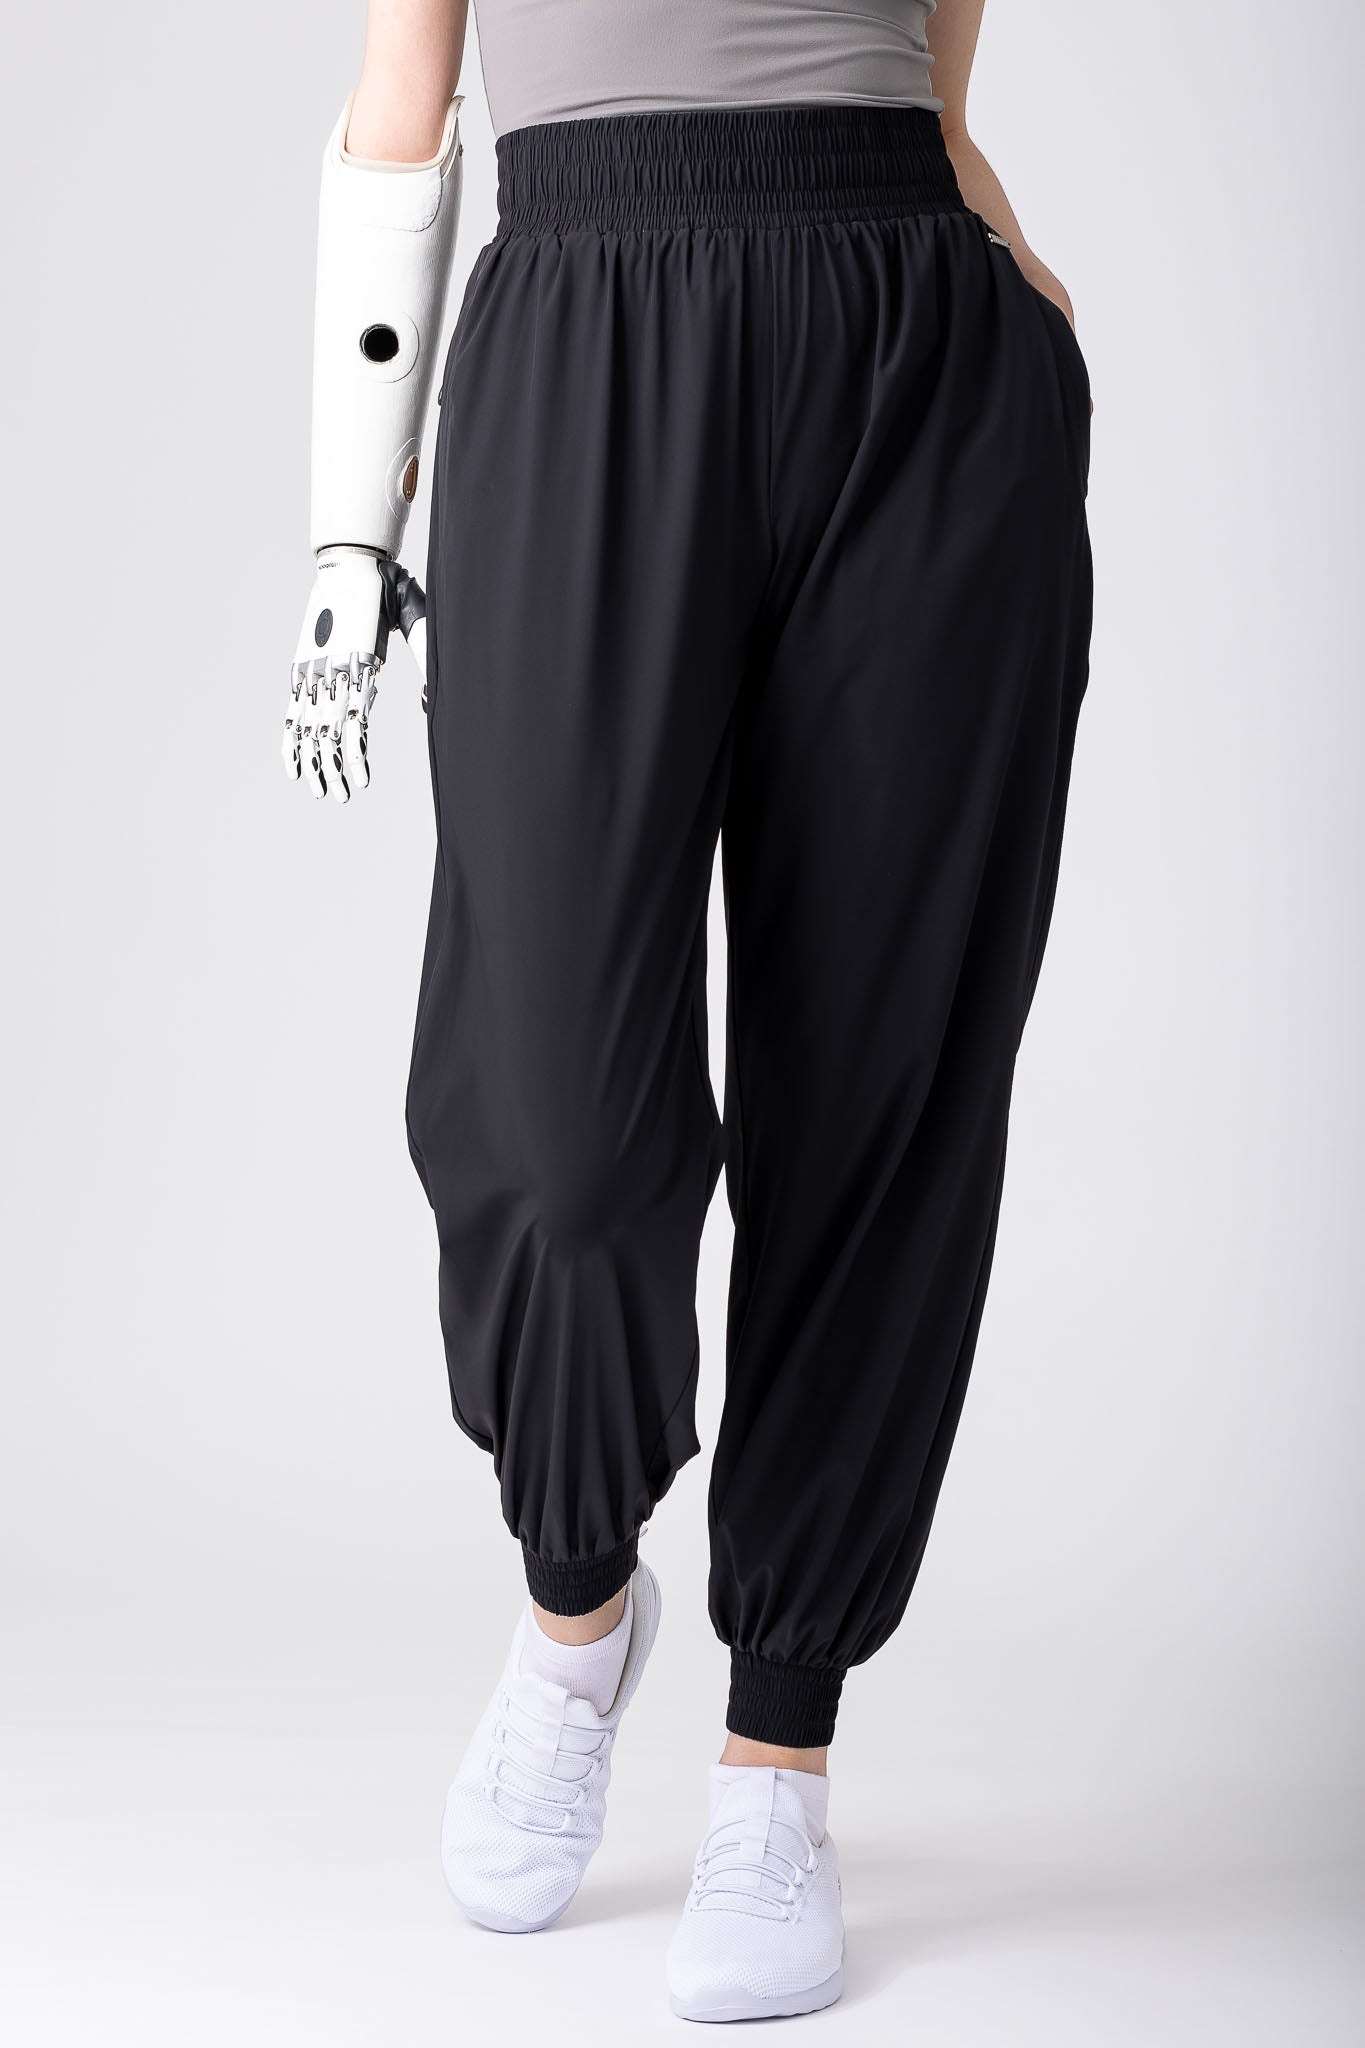 Lightweight joggers in black, with pockets and hight supportive waist.